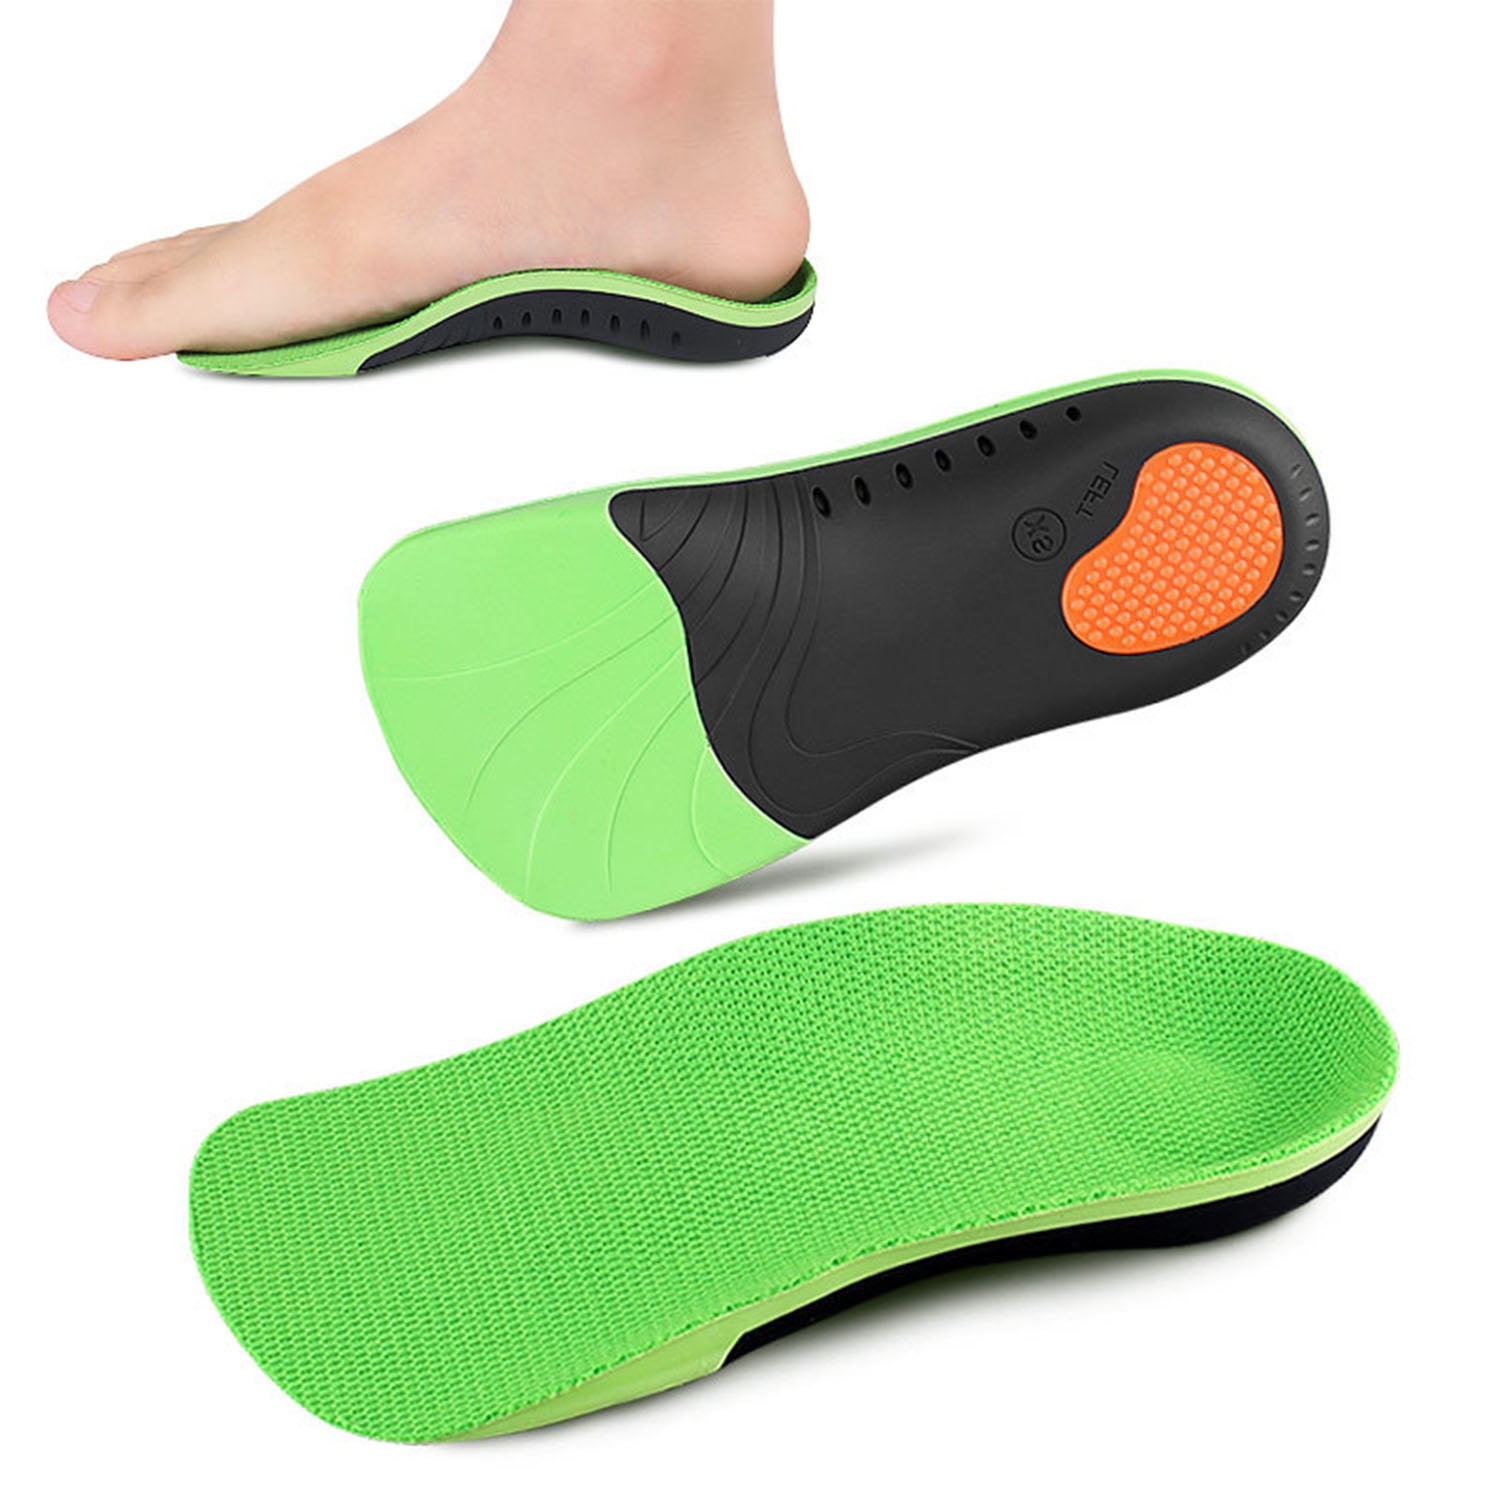 3/4 Orthotic Insoles Arch Support Pad Cushion Plantar Fasciitis Shoe Inserts 